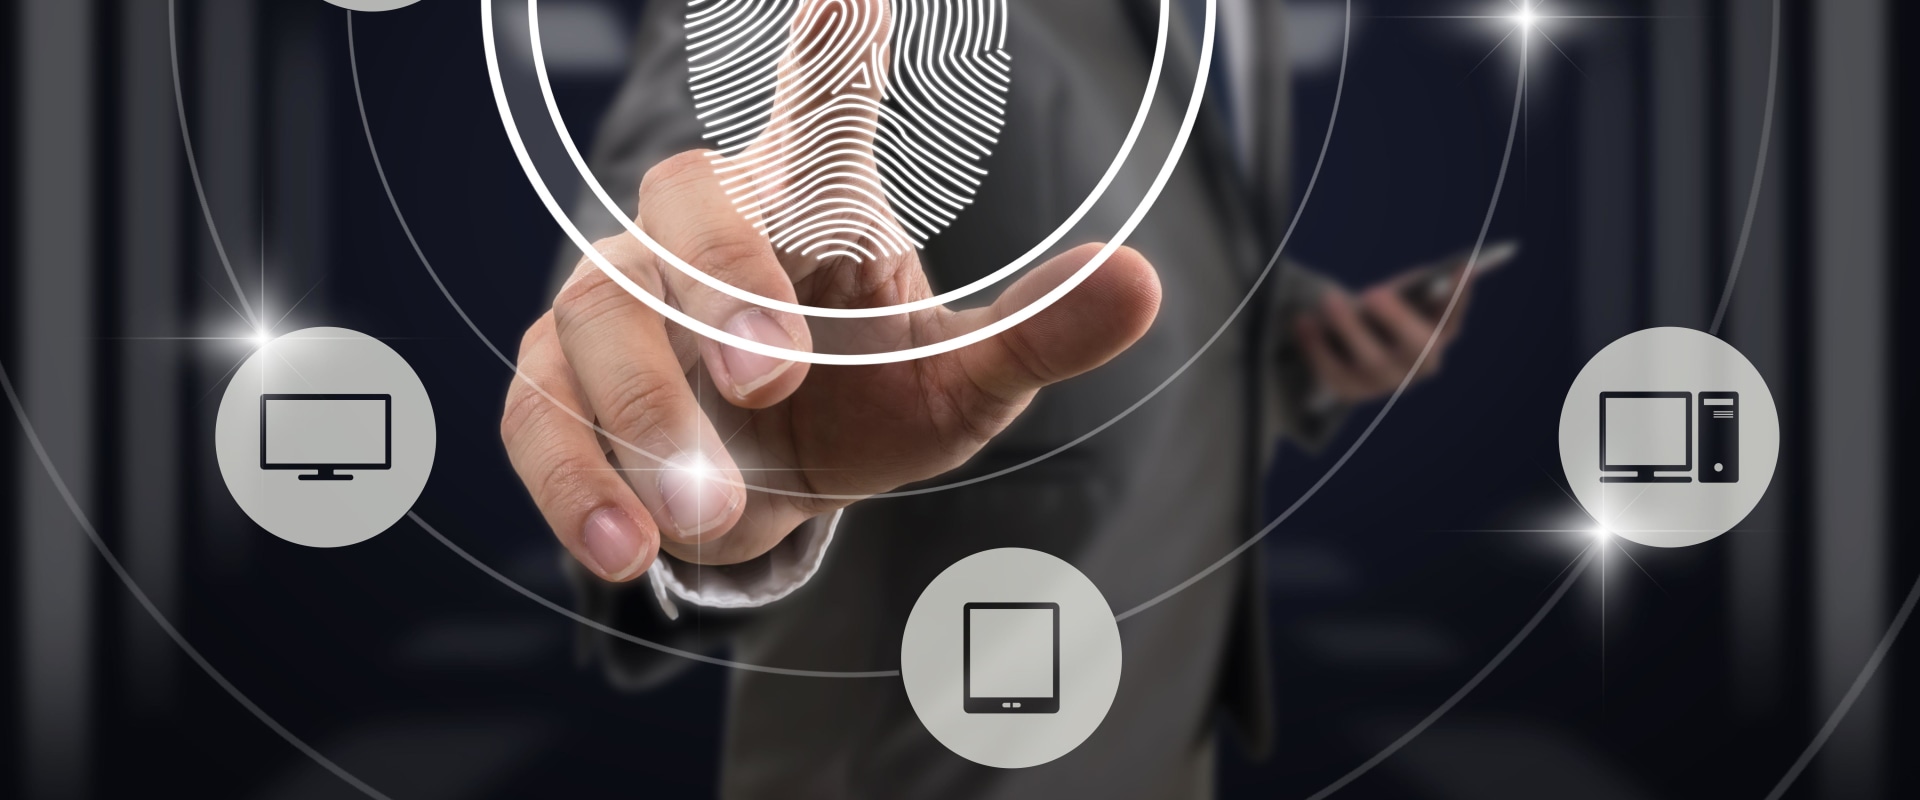 Fingerprint Recognition Systems: An Overview